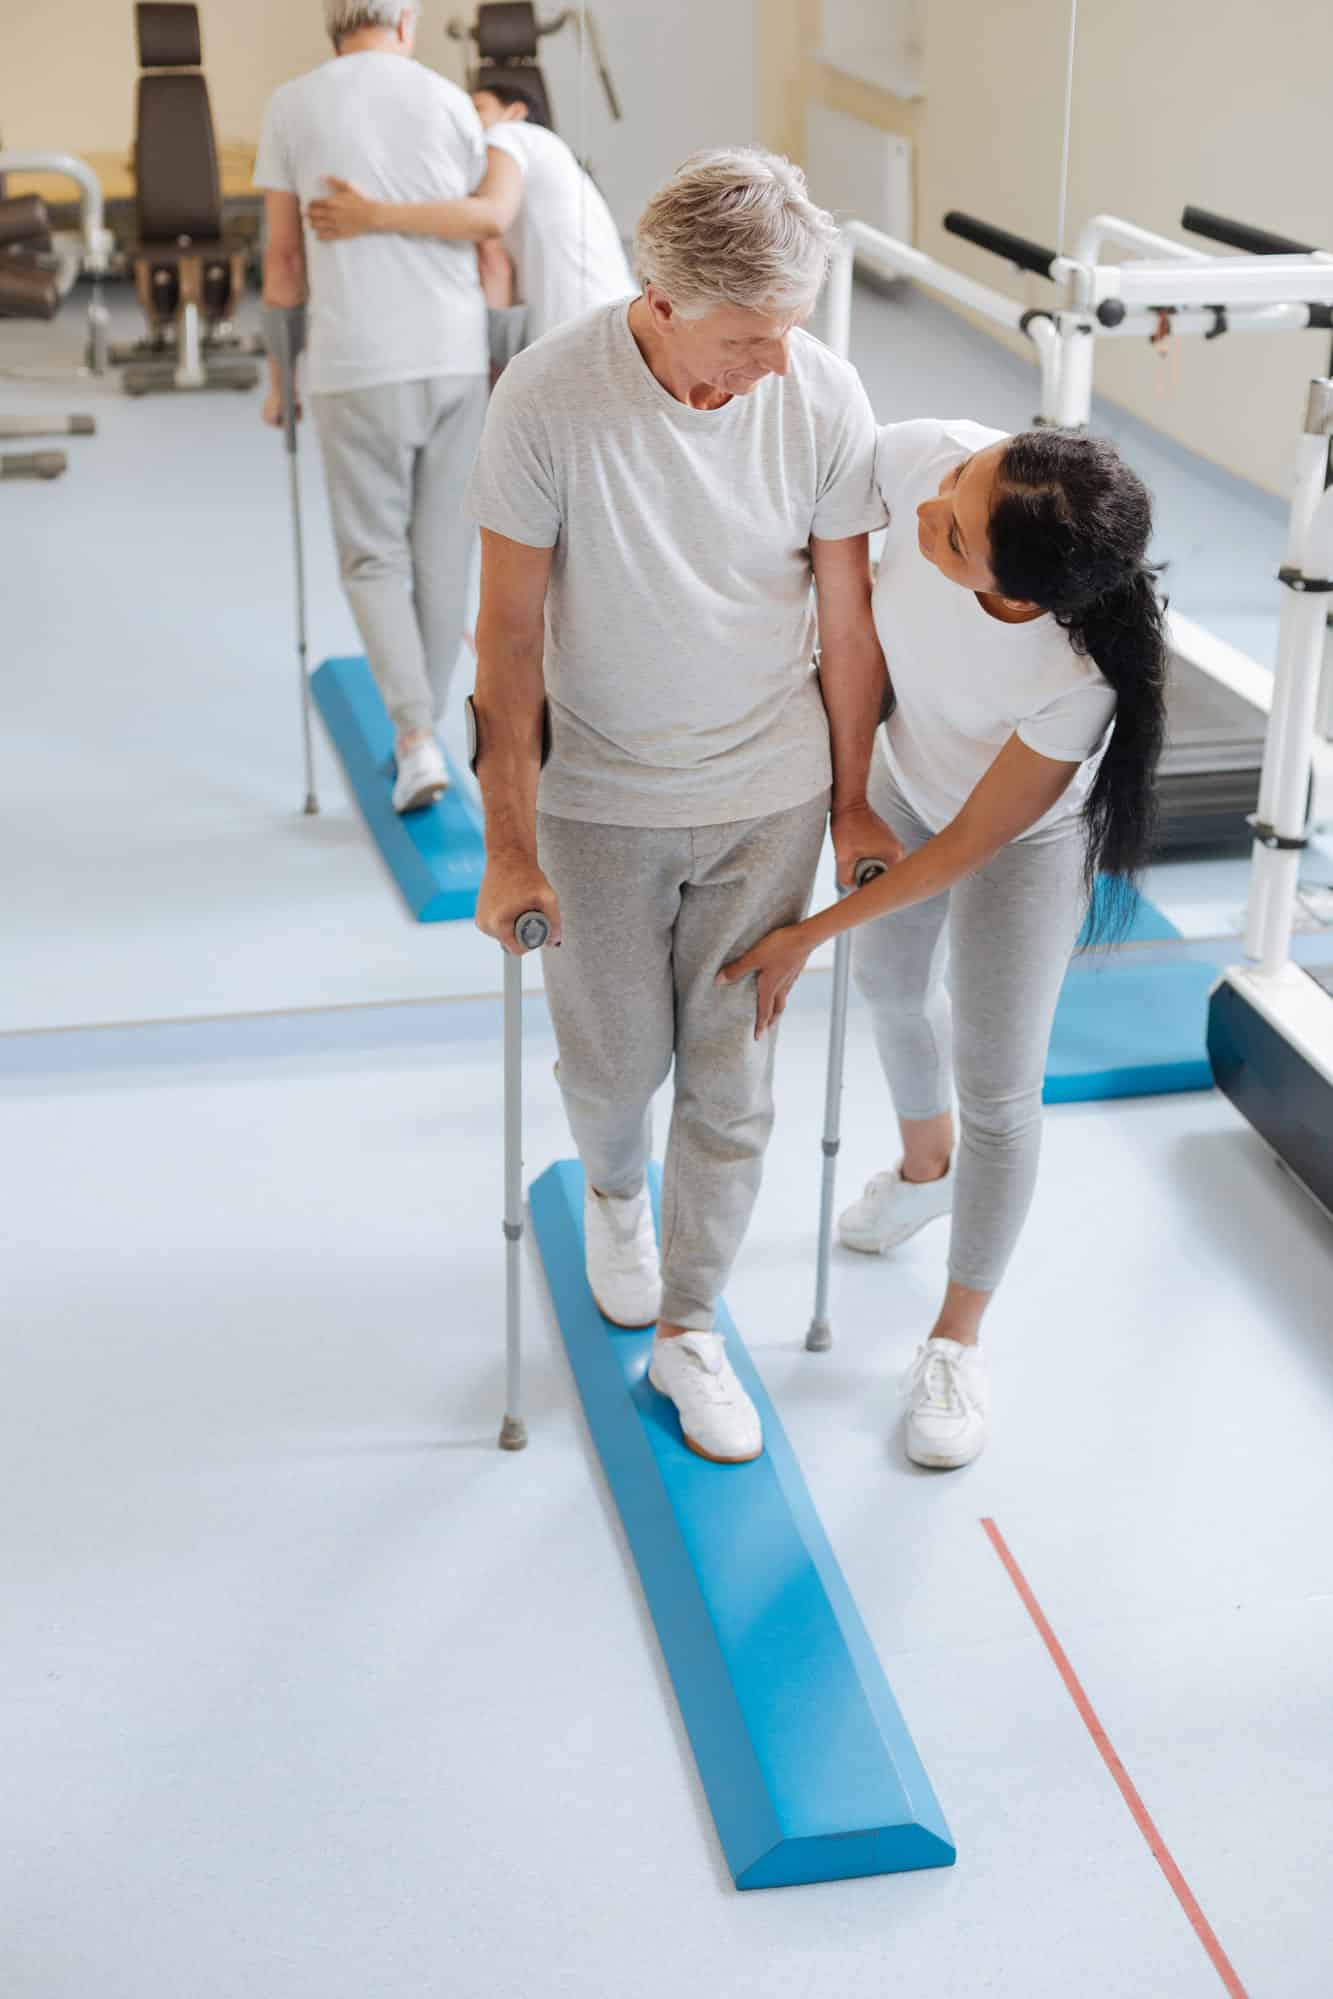 A man with crutches and a woman with crutches in a gym.